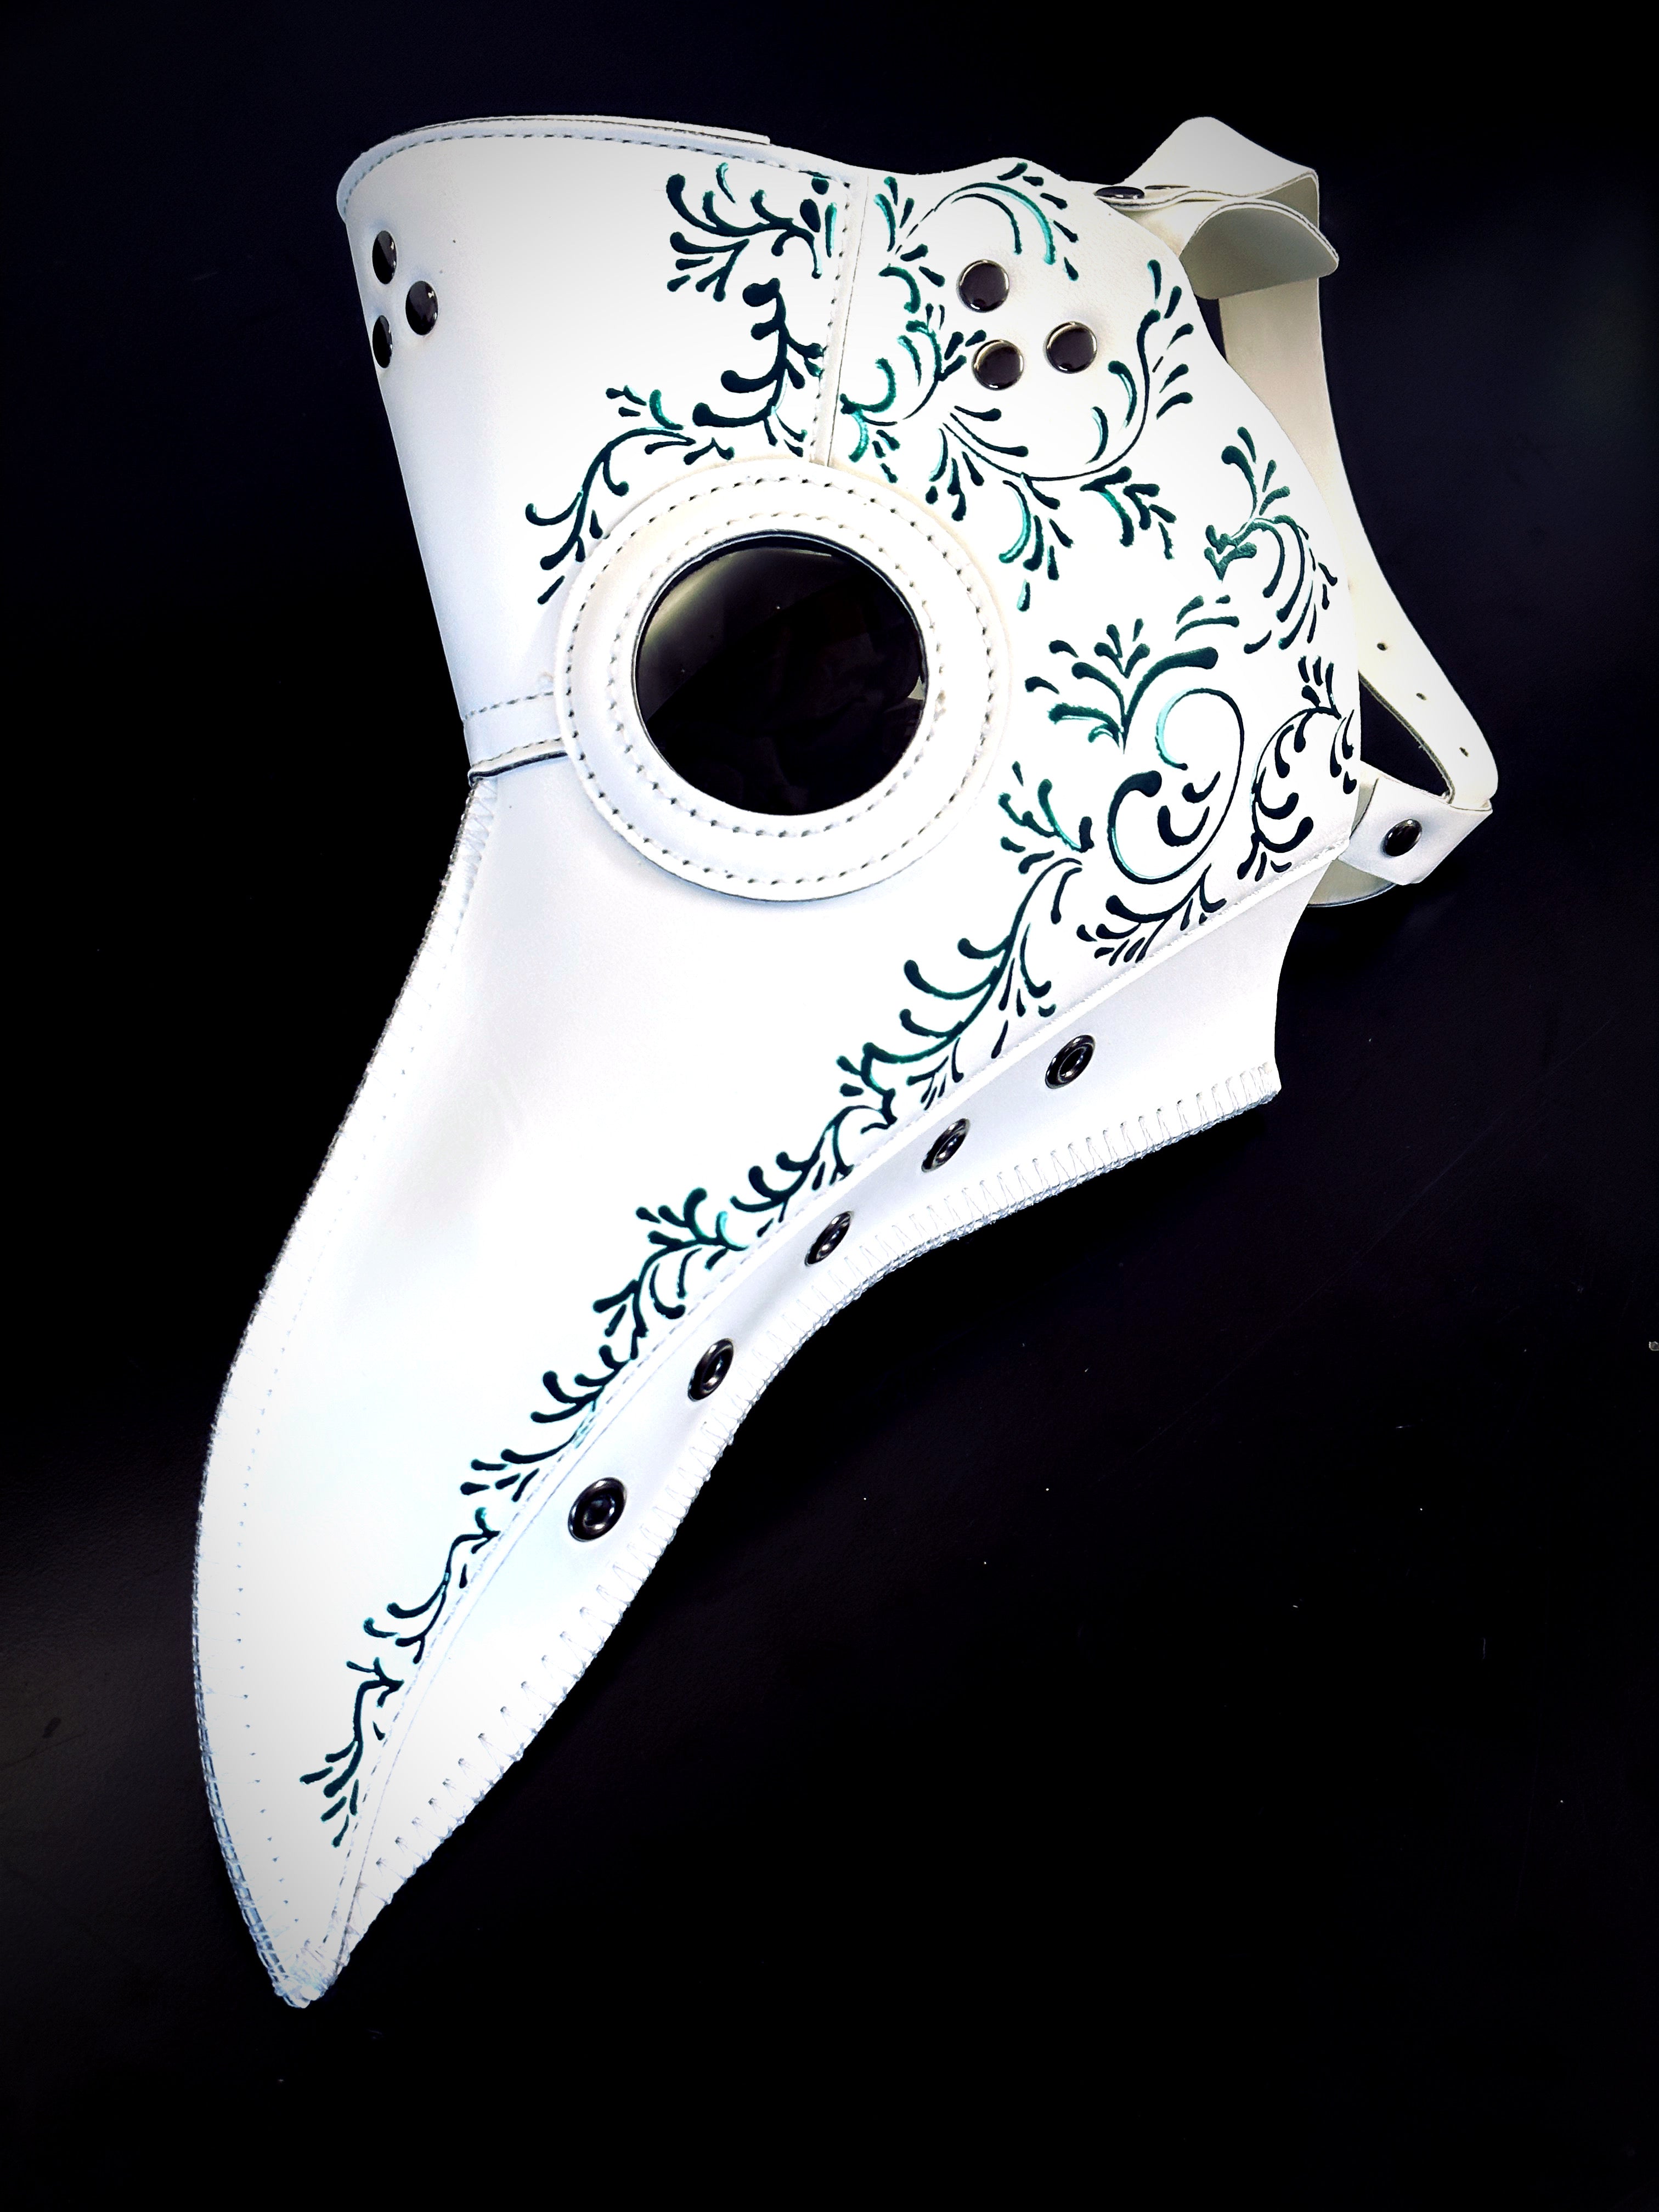 White plague mask with green filigree for sale.